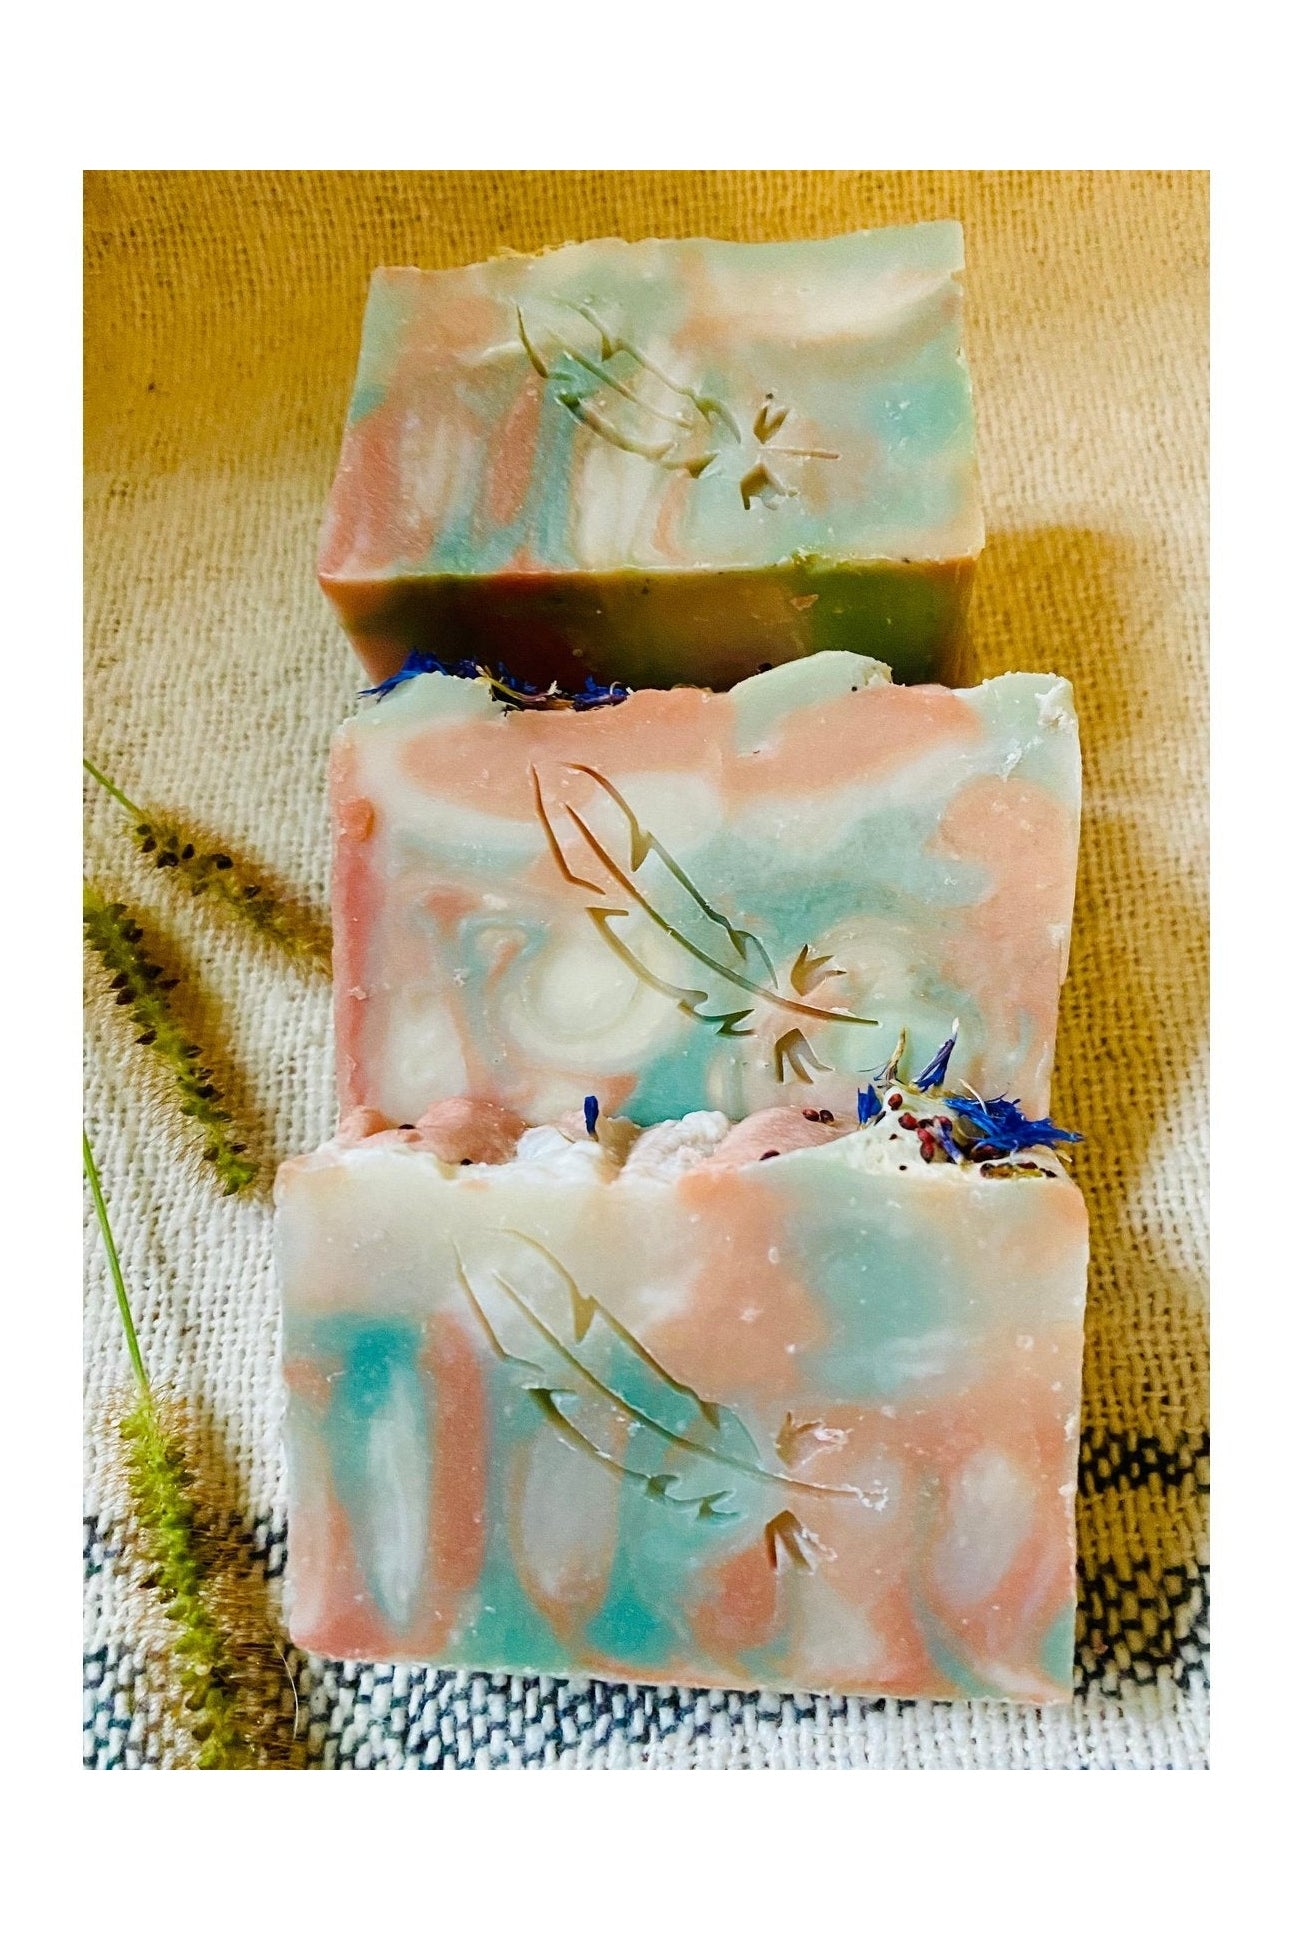 Specialty Soap~Lingnonberry Spice